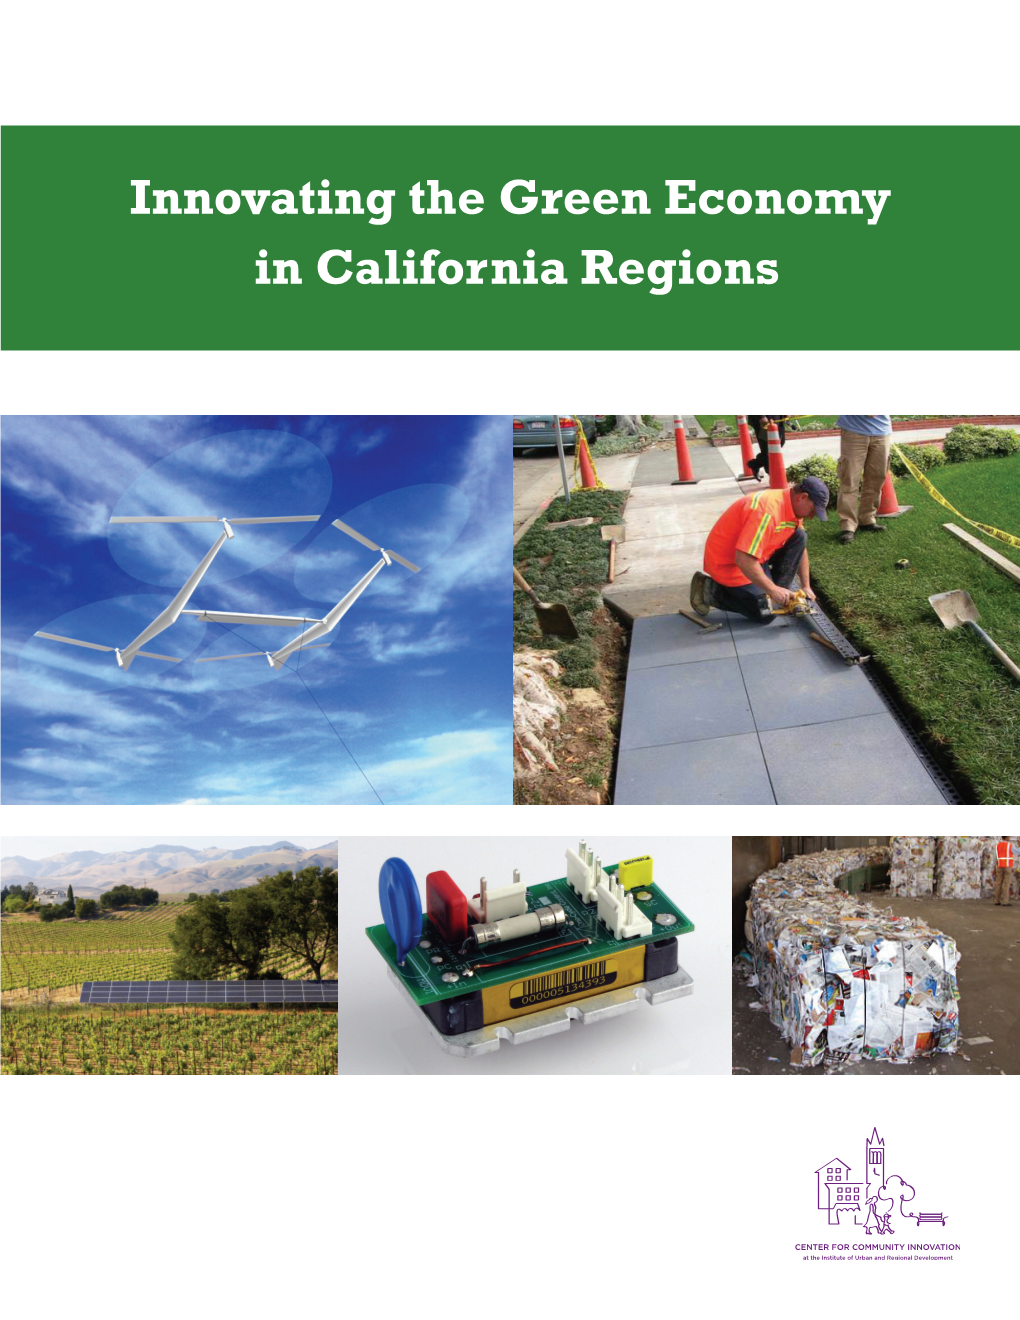 Innovating the Green Economy in California Regions Authors Karen Chapple and Malo Hutson, Principal Investigators, with Cynthia Kroll, T